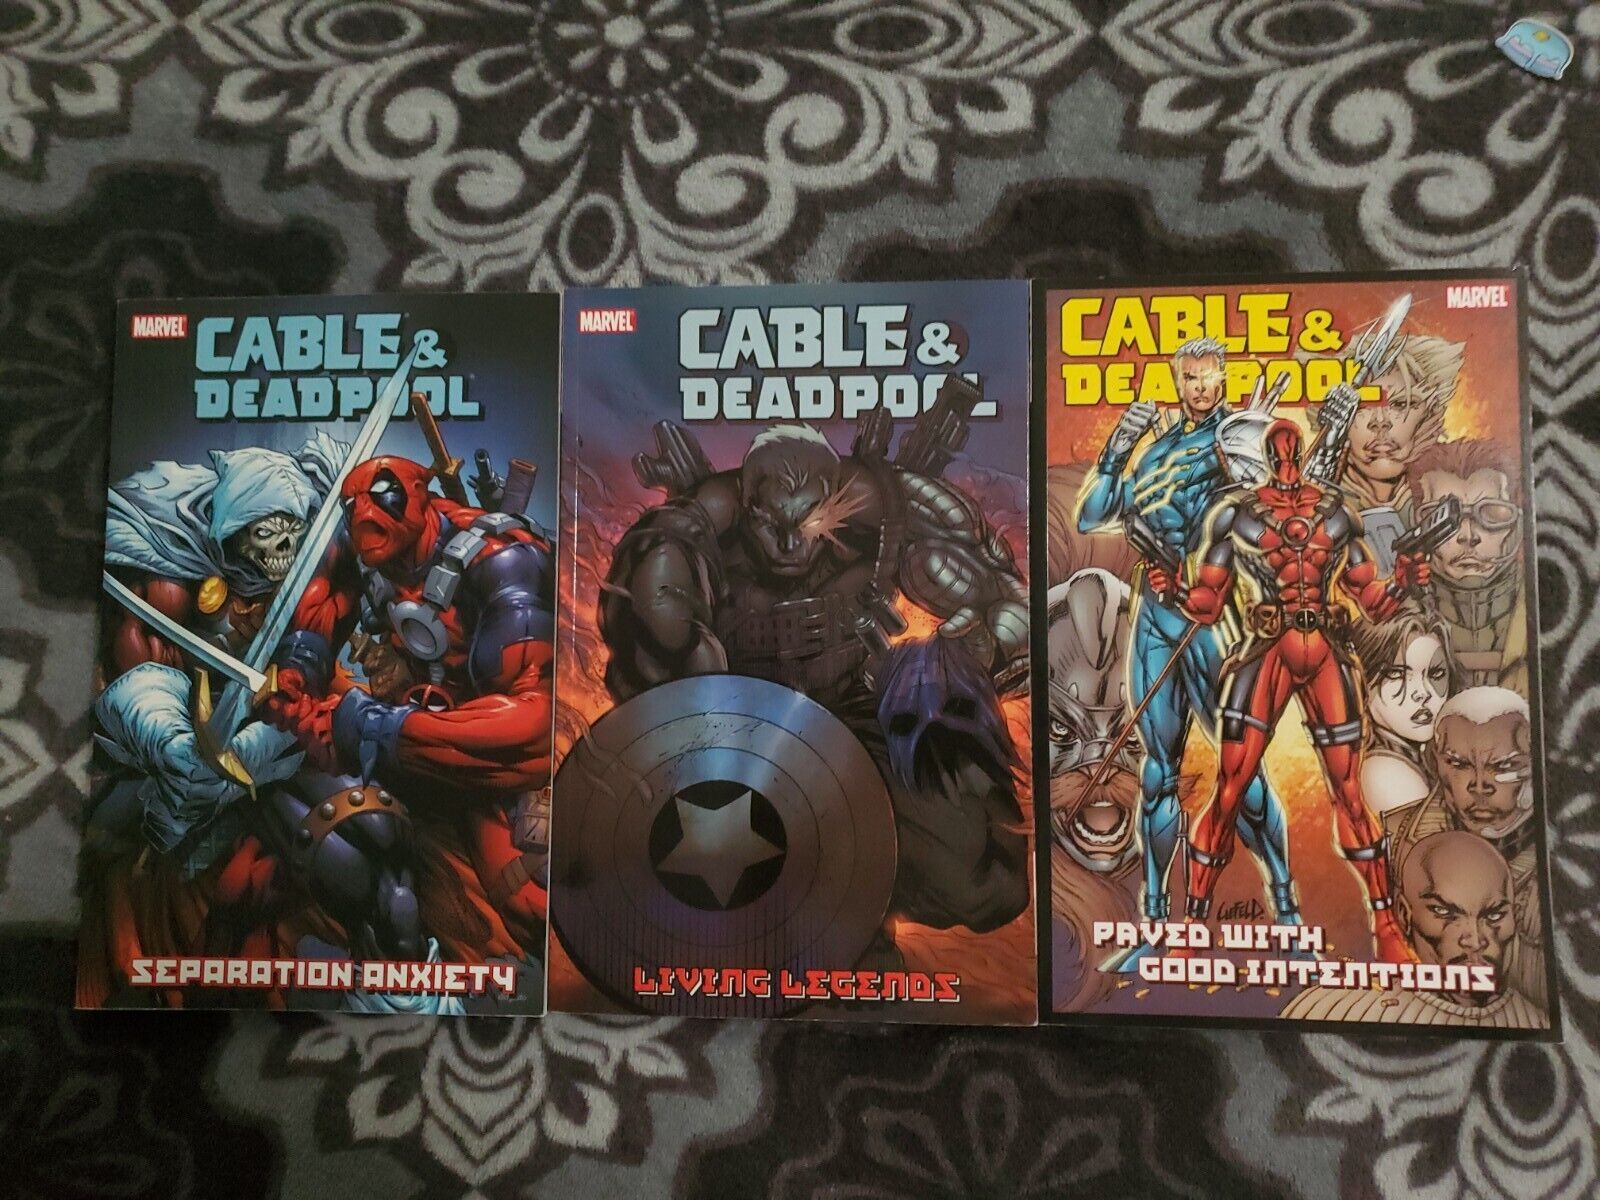 Cable & Deadpool -Separation Anxiety - Living Legends - Paved W/ Good Intentions